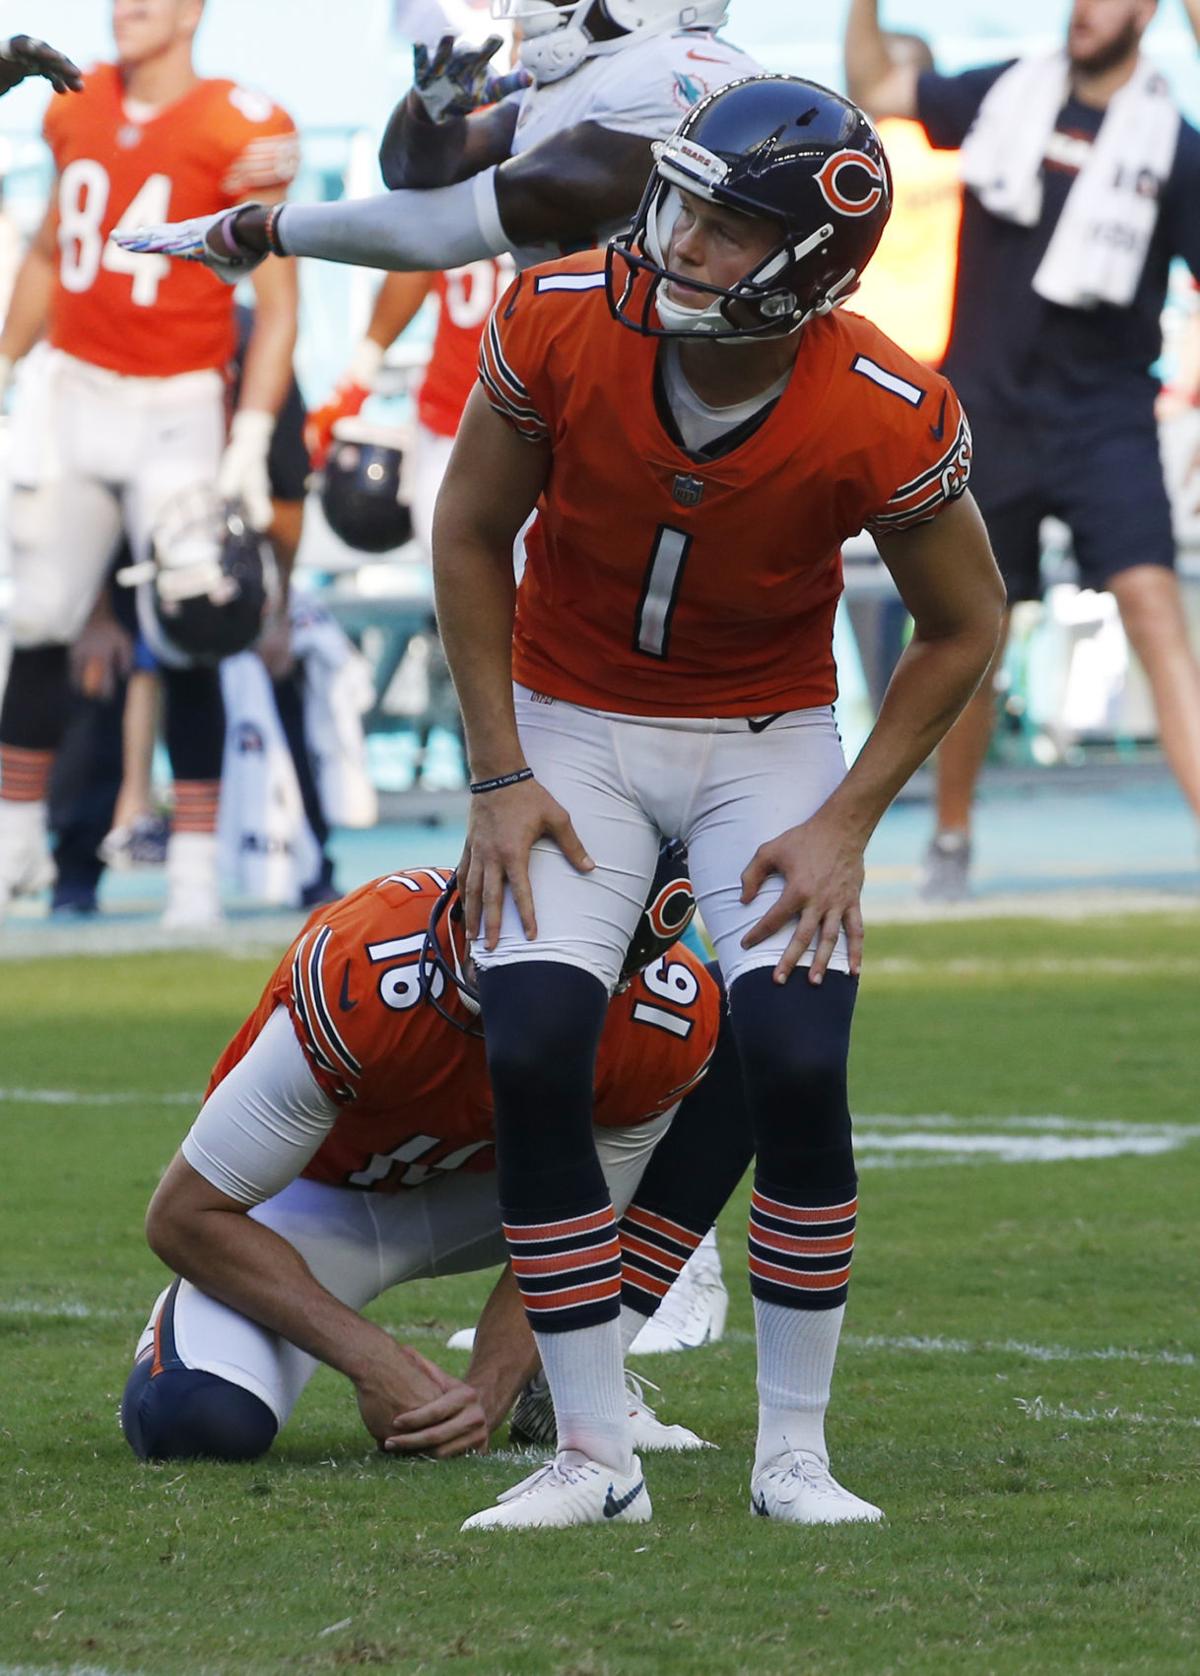 Bears Lose To Dolphins Osweiler On Overtime Field Goal Football